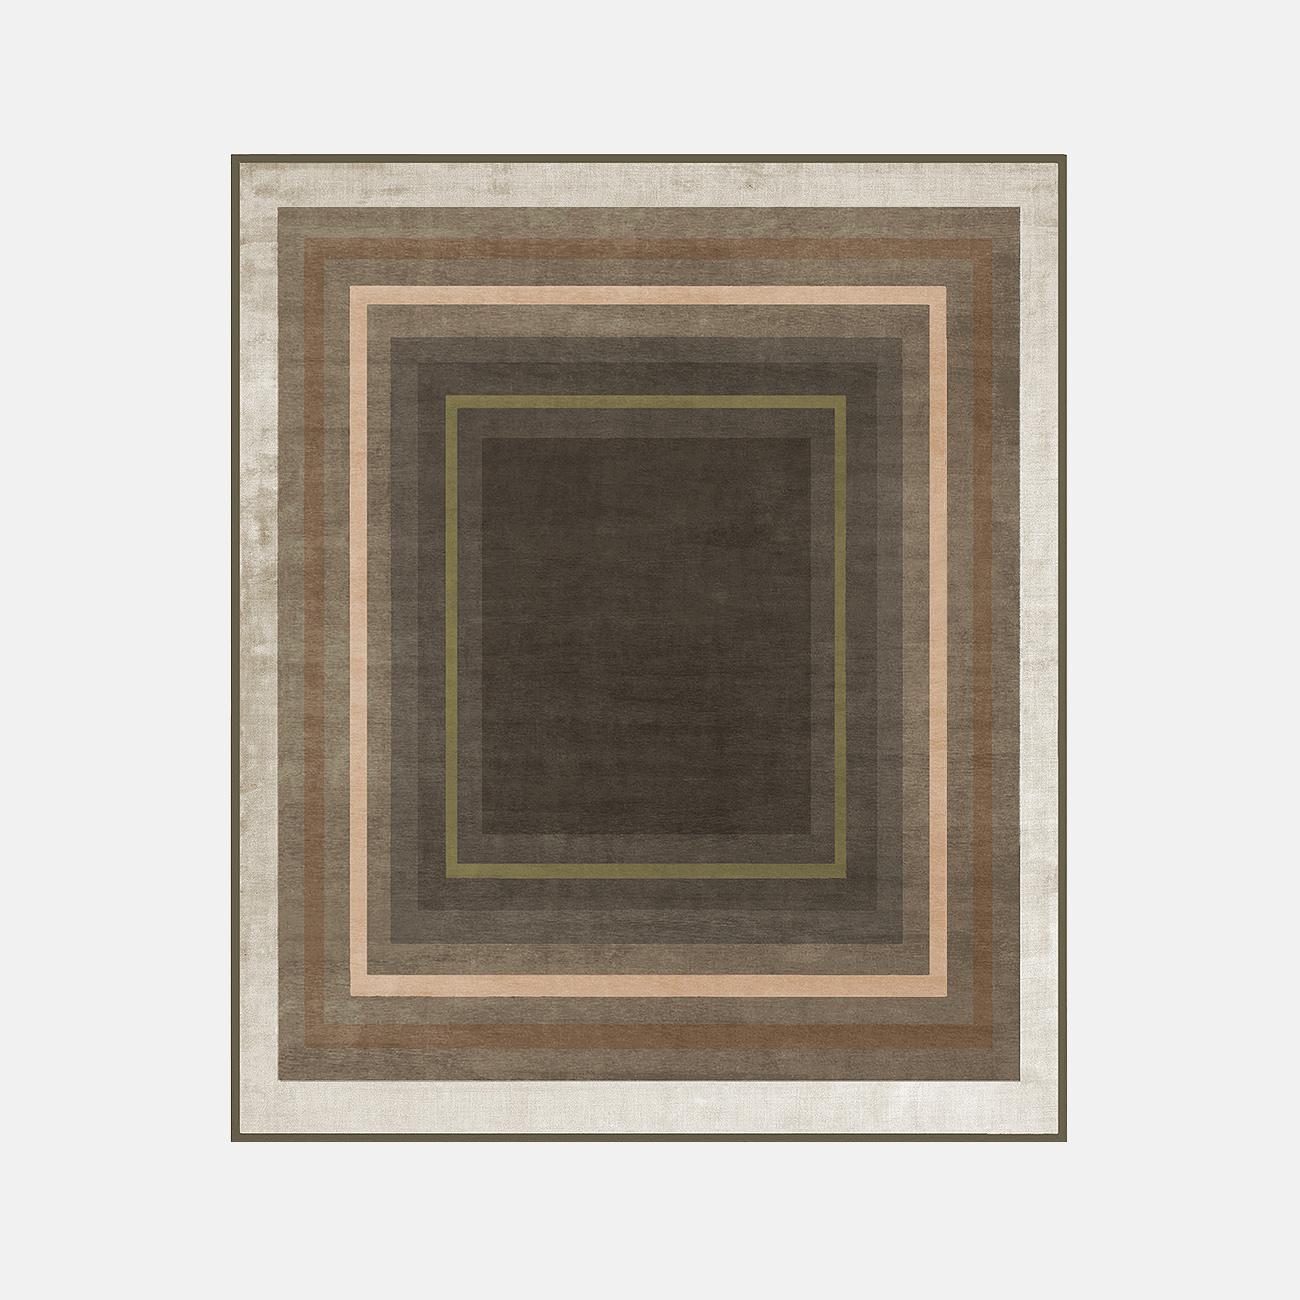 Eden Park Station Muted Rug by Atelier Bowy C.D.
Dimensions: W 243 x L 300 cm.
Materials: Wool.
Available in Golden Hour version.

Available in W140 x L220, W170 x L240, W210 x L300, W230 x L300, W243 x L300 cm.

Atelier Bowy C.D. is dedicated to